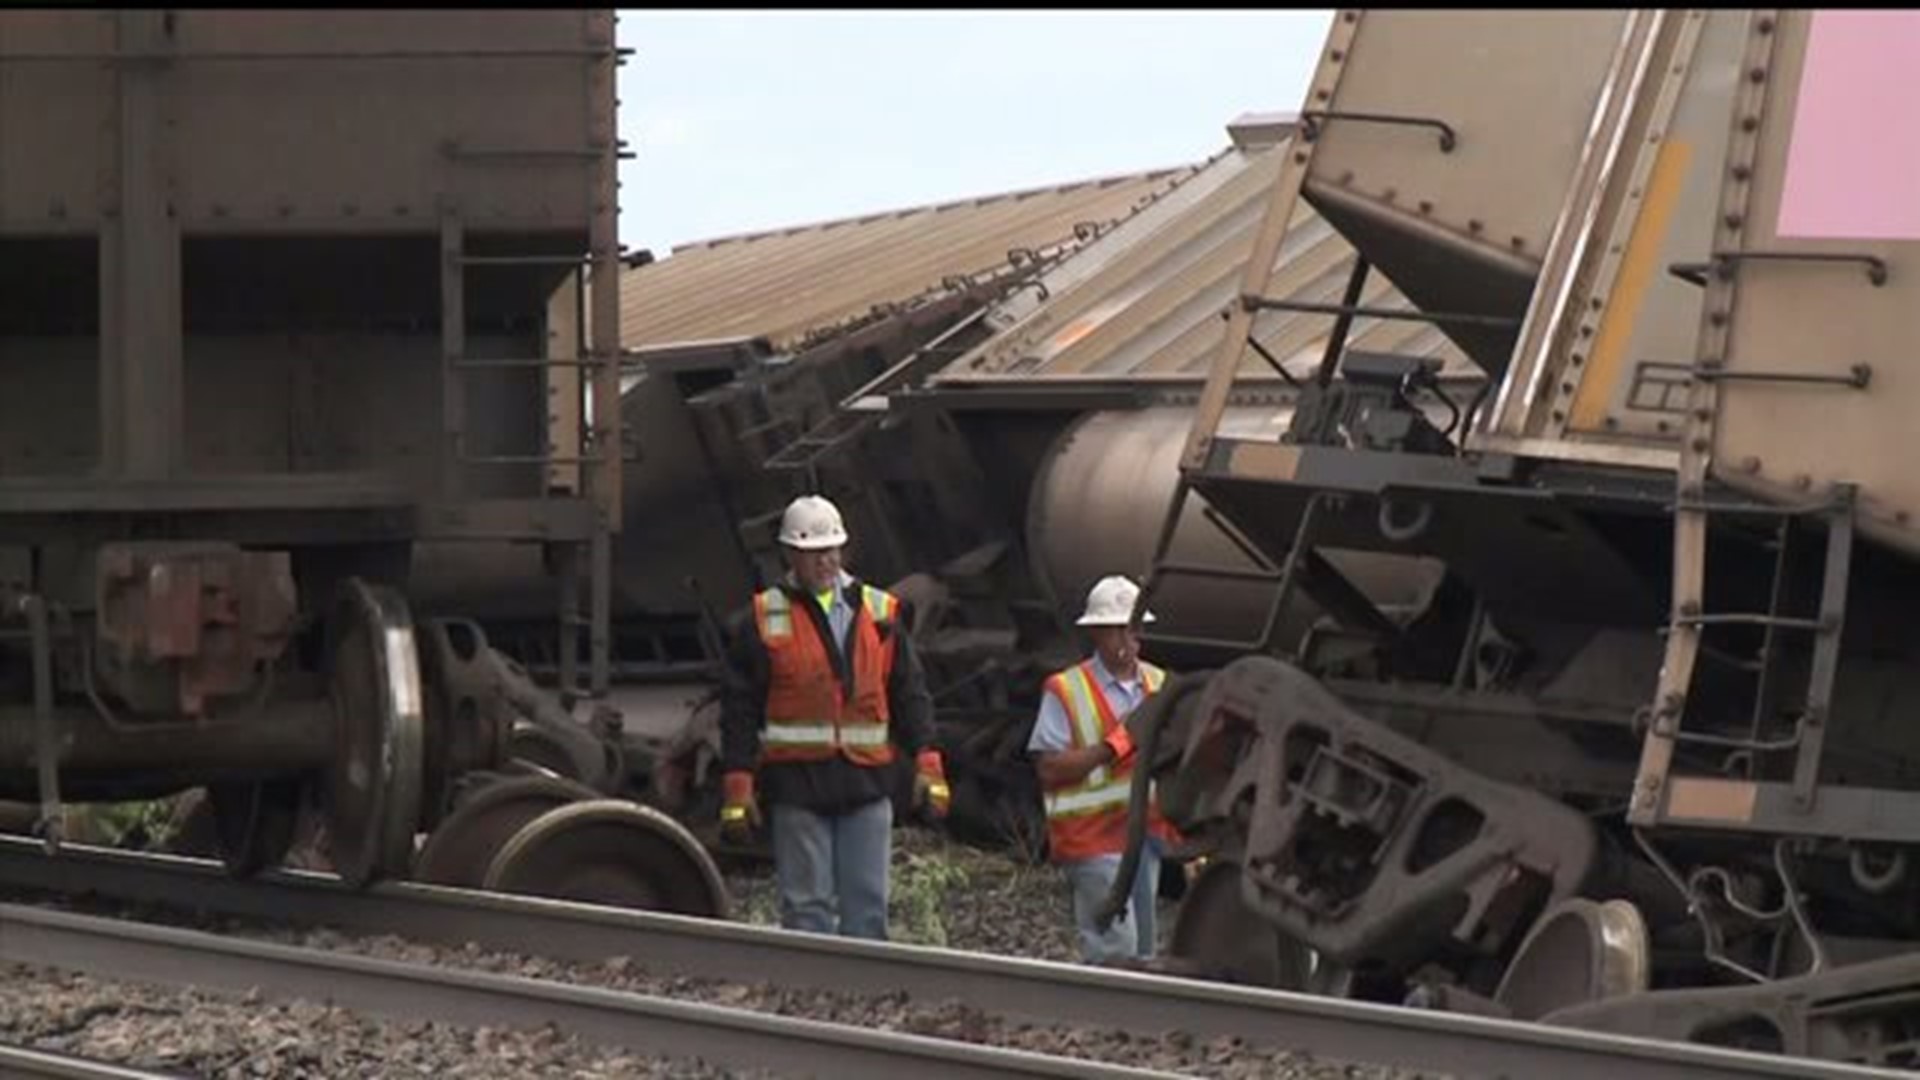 Dozens of train cars knocked over by winds